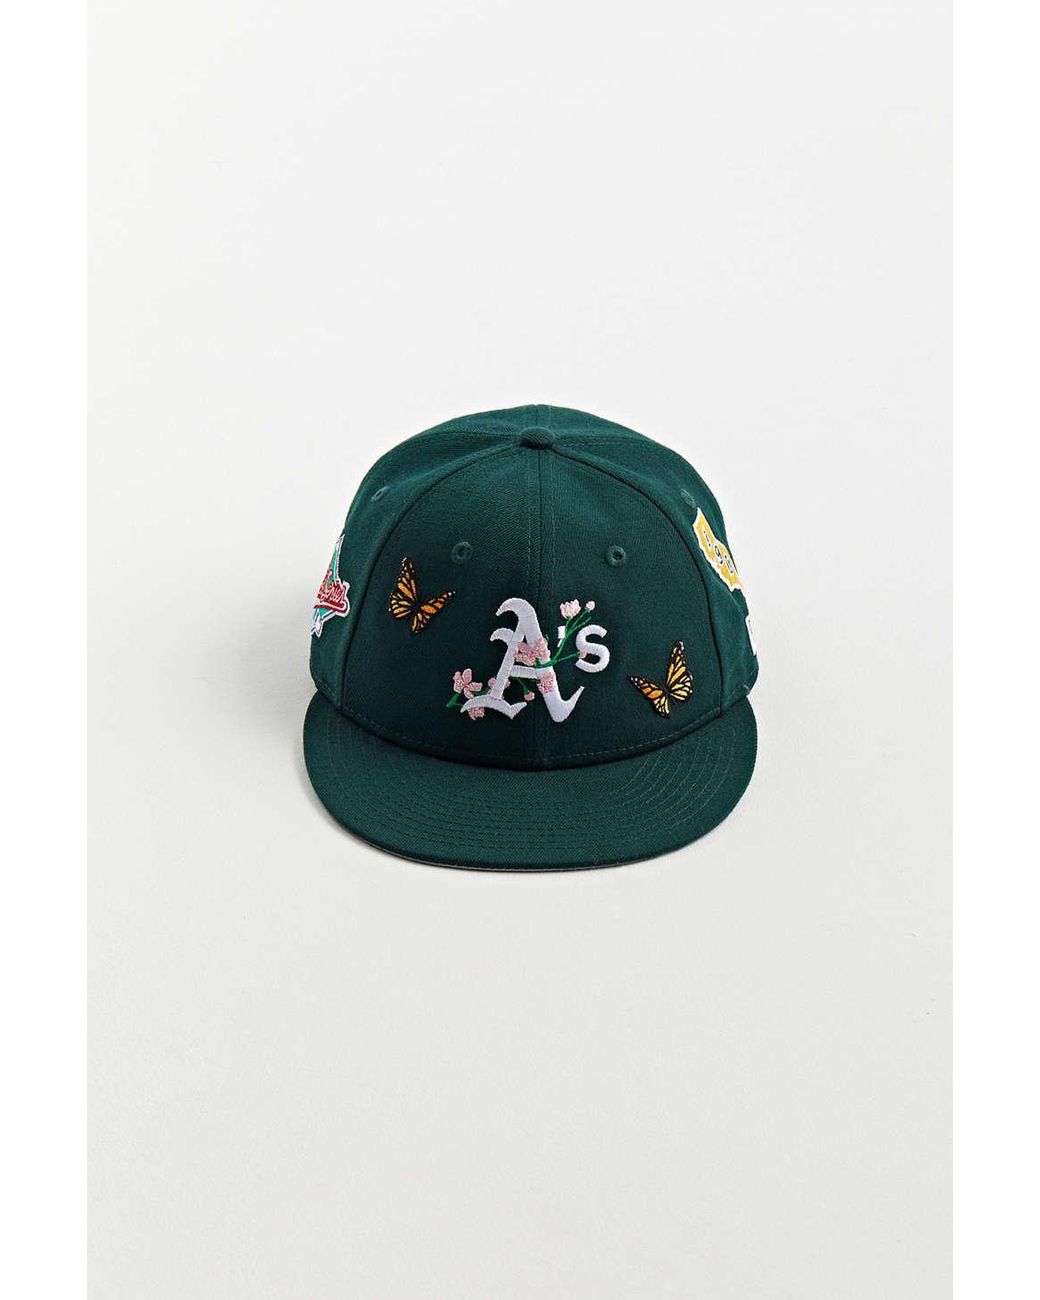 Oakland Athletics Hatclub  Custom fitted hats, Mens accessories necklace,  Fitted hats